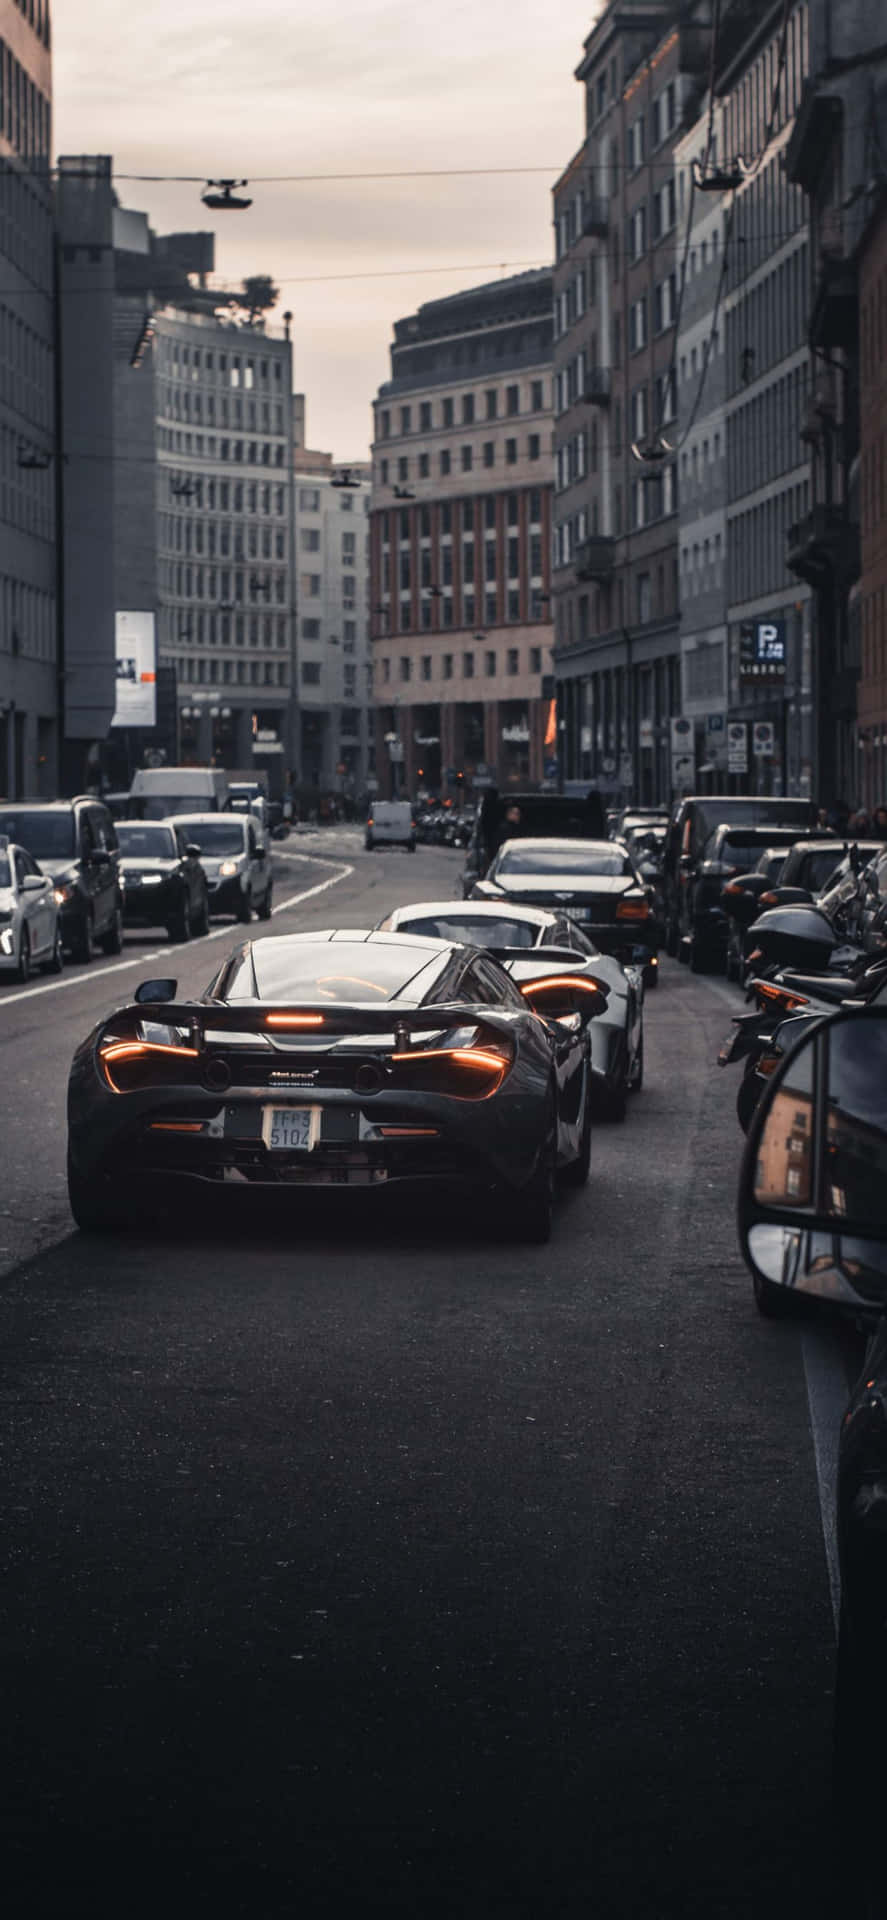 Image  The Luxury Sports Car of Your Dreams: Iphone Xs Max McLaren 720s